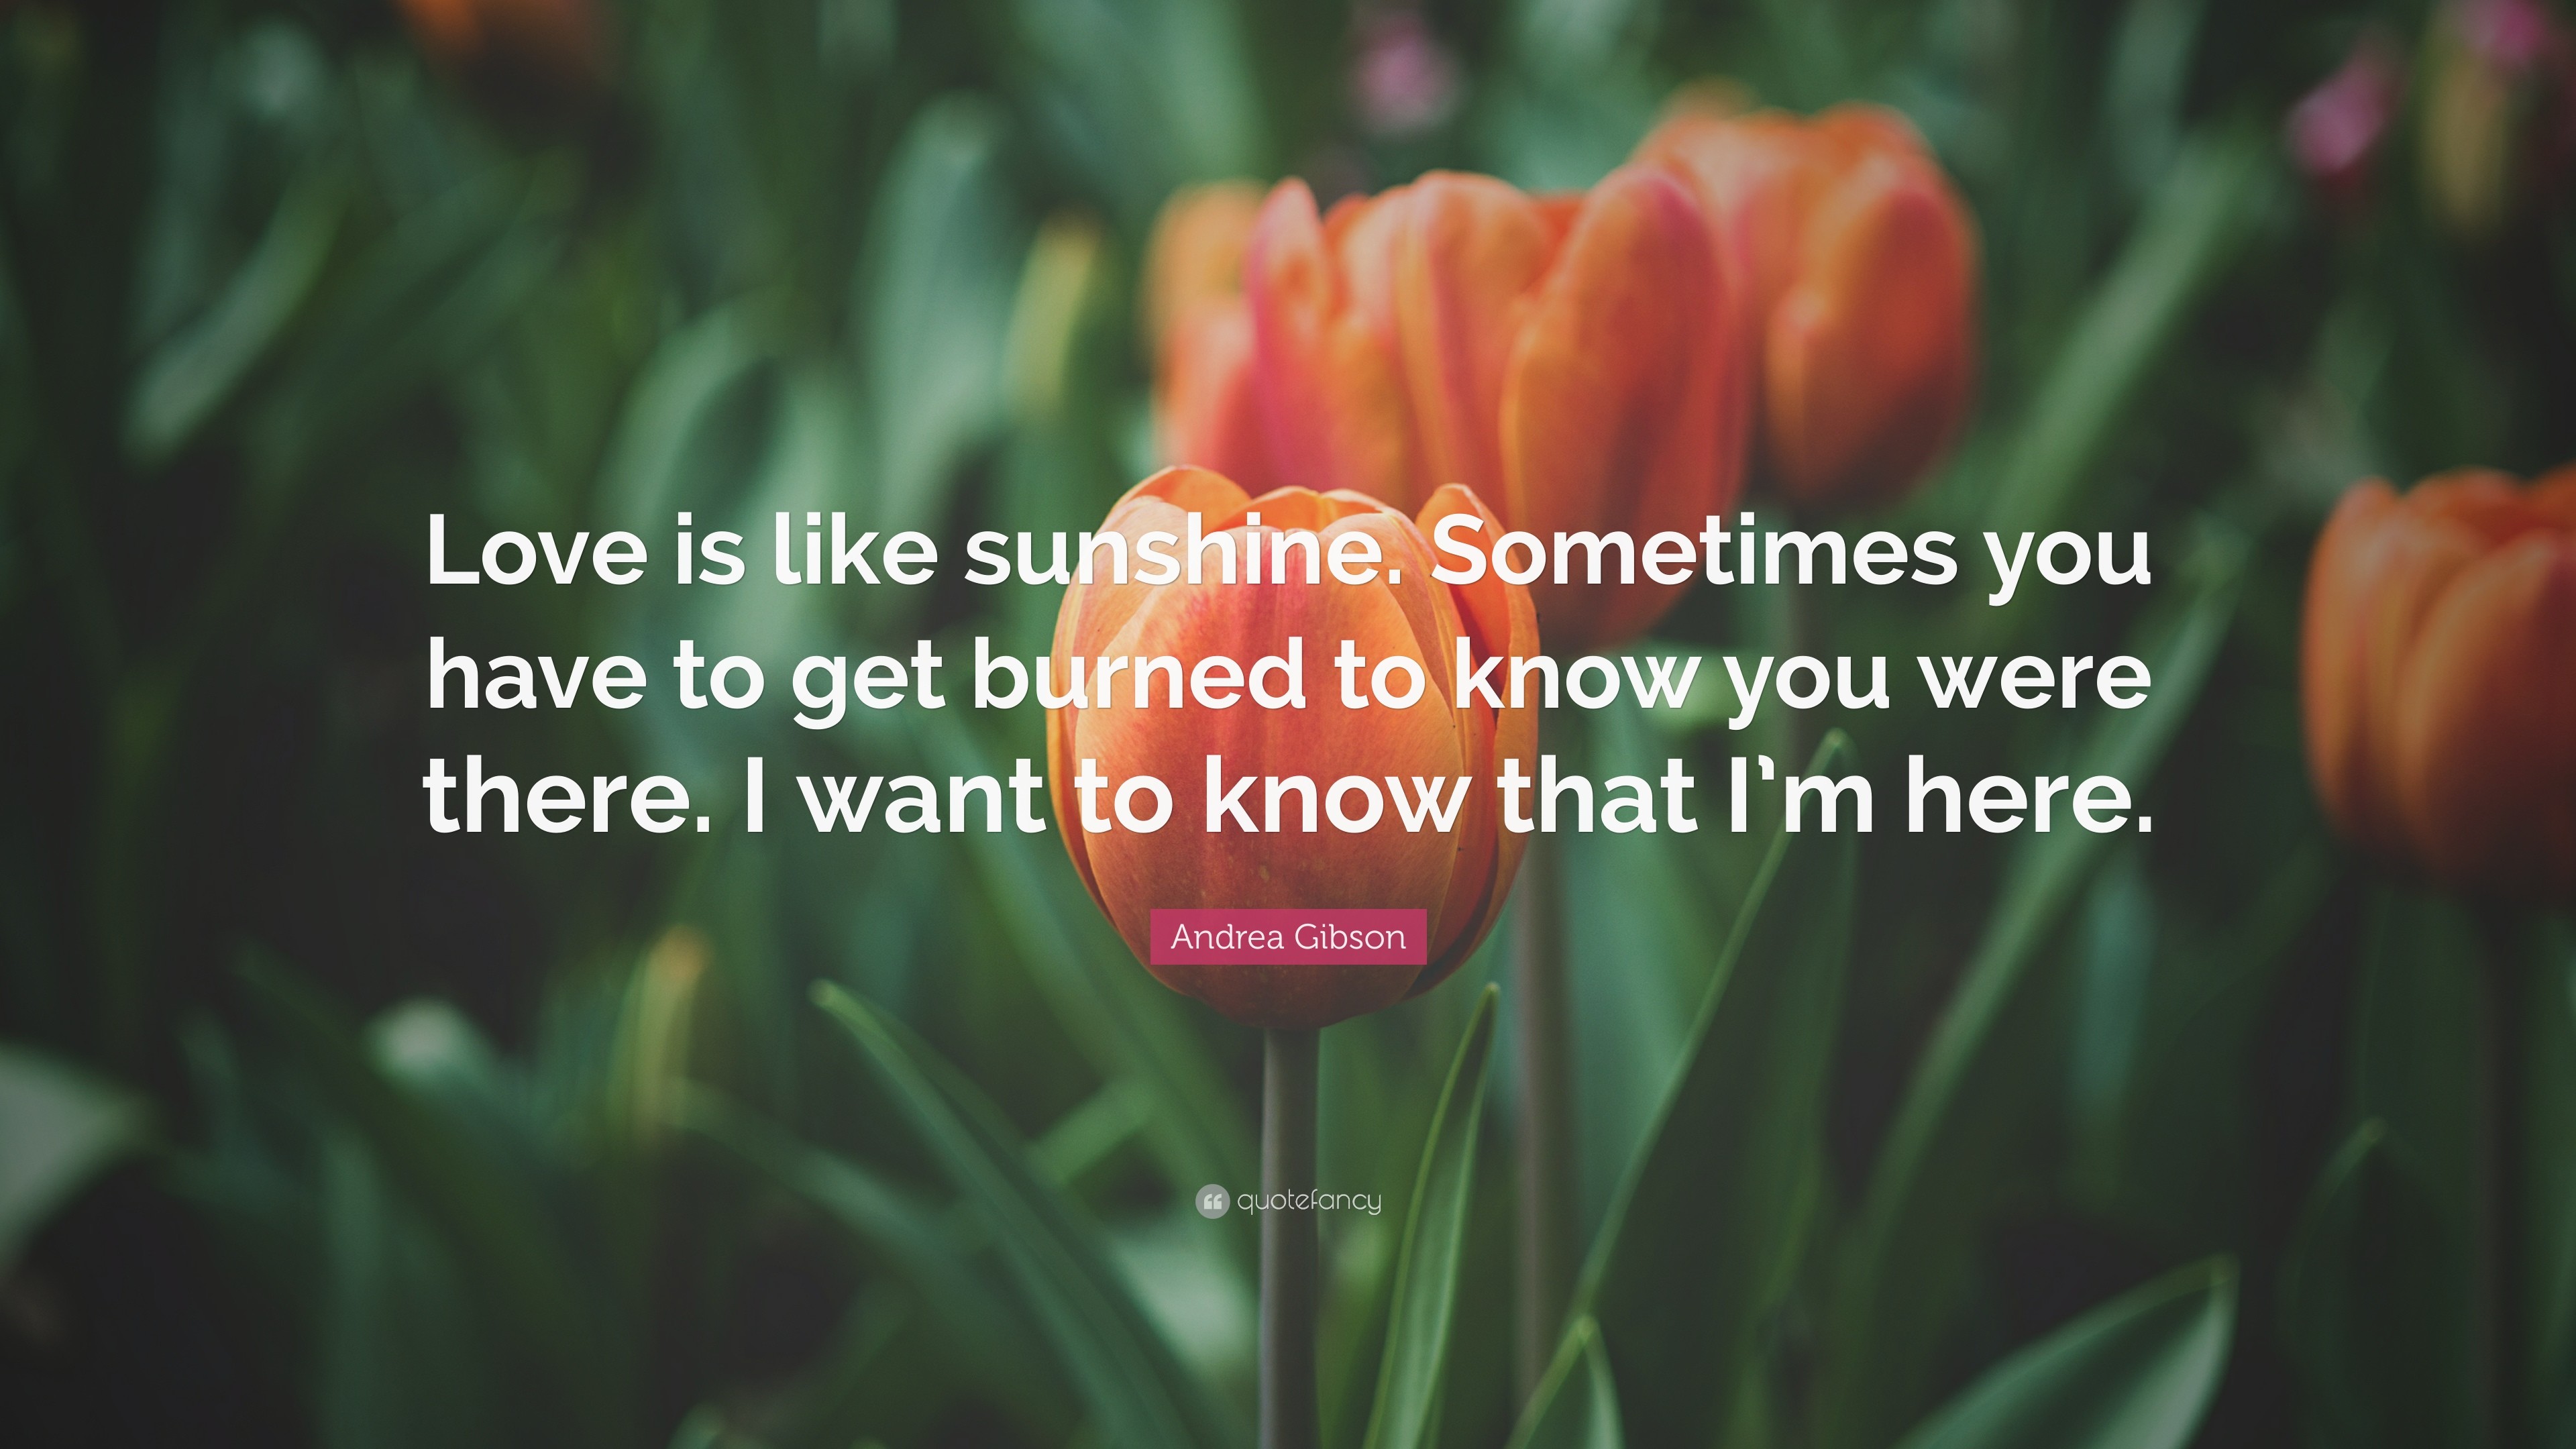 3840x2160 Andrea Gibson Quote: “Love is like sunshine. Sometimes you have to get  burned